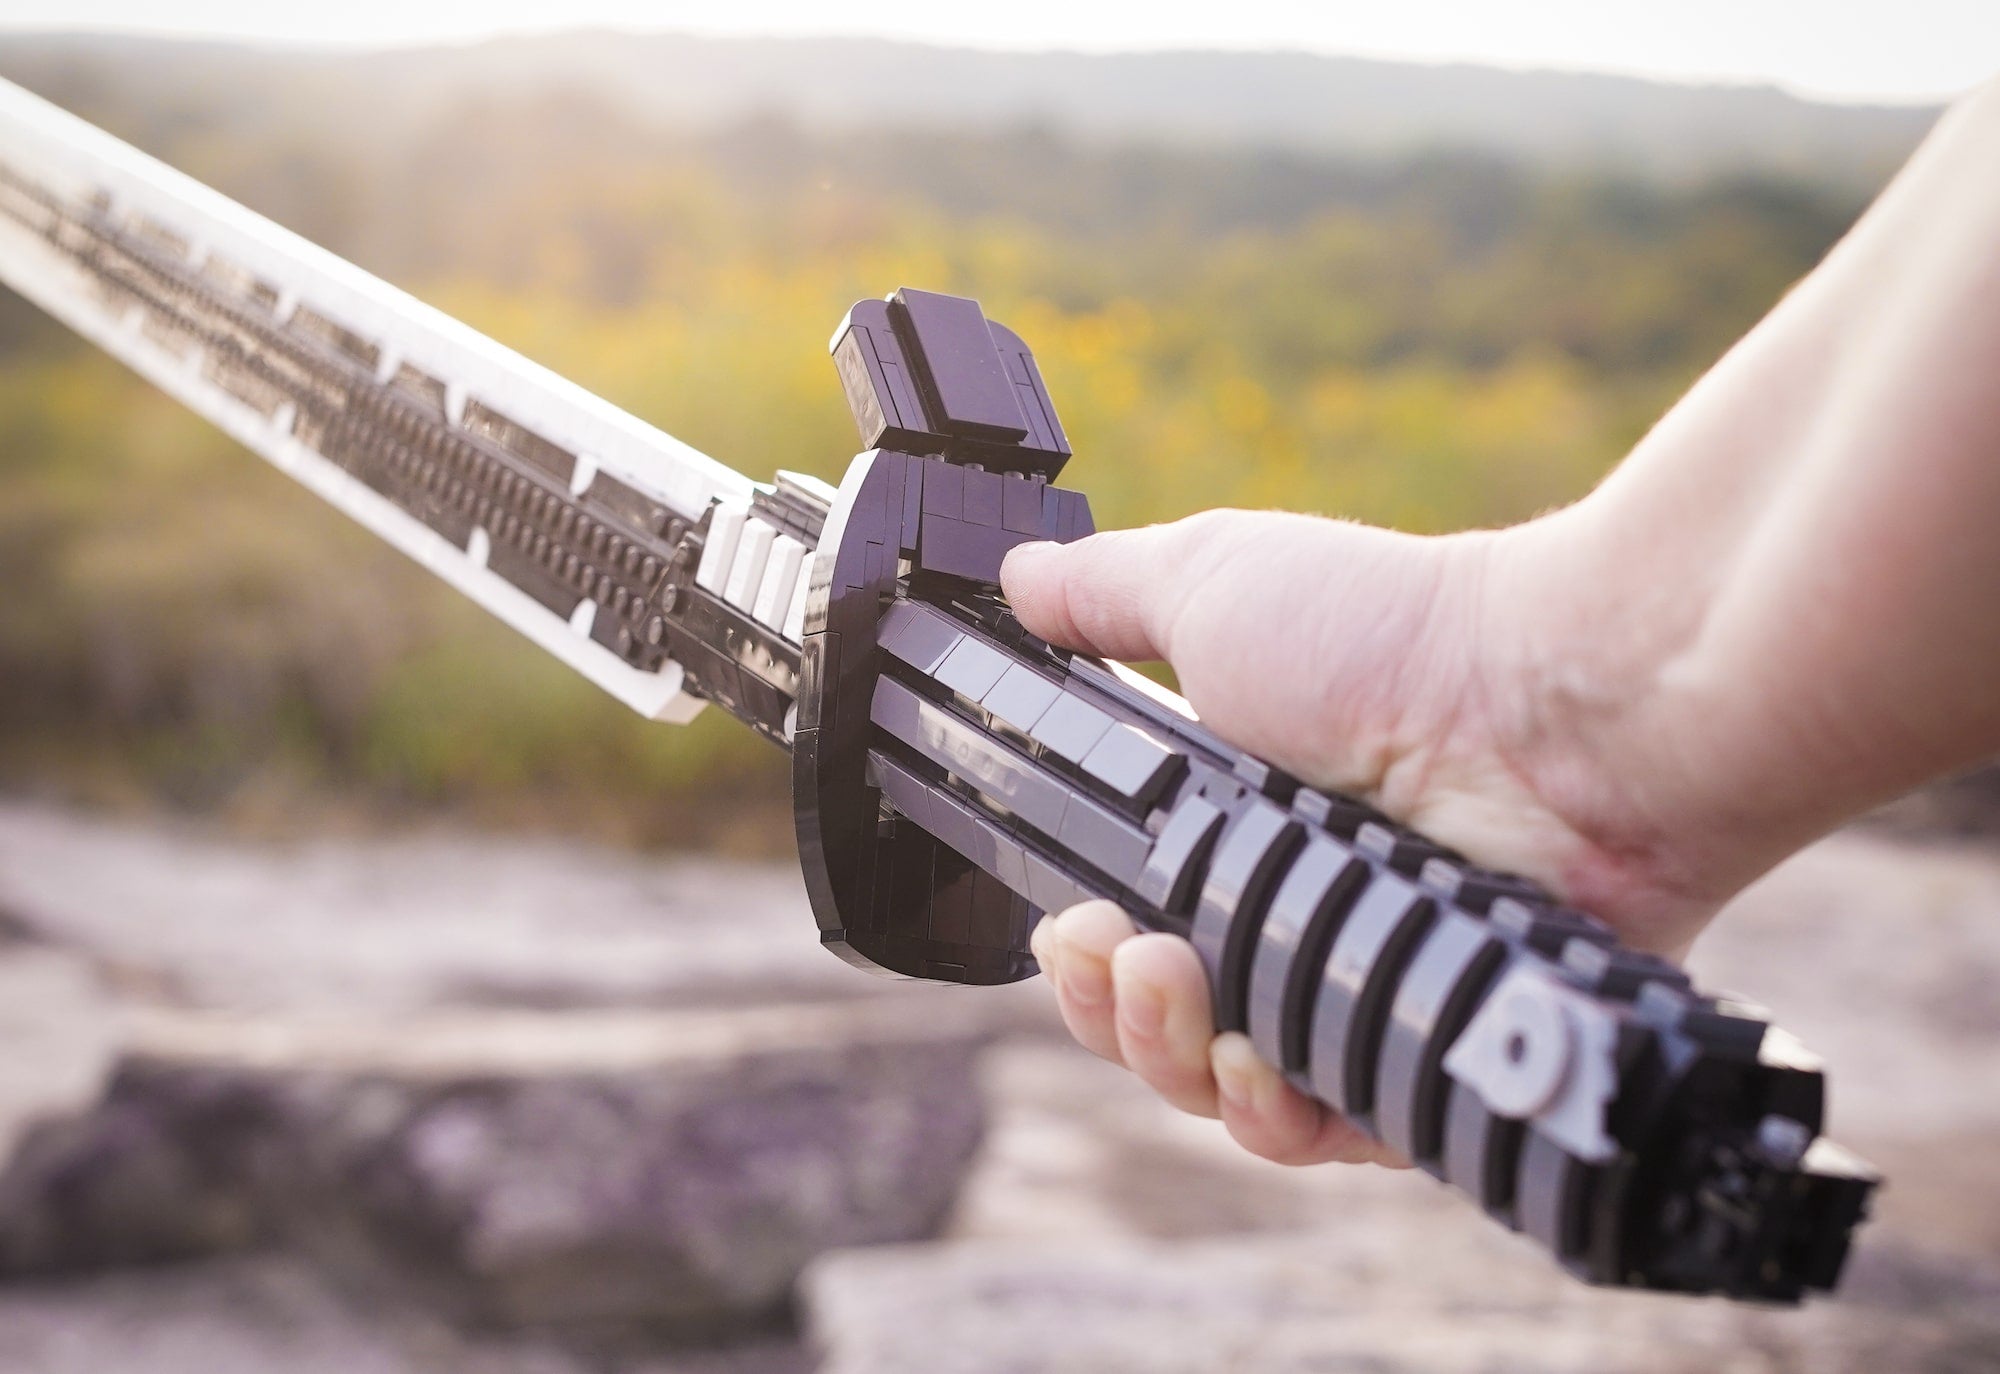 Black Saber Wieldable Life-Sized Blade in LEGO Bricks